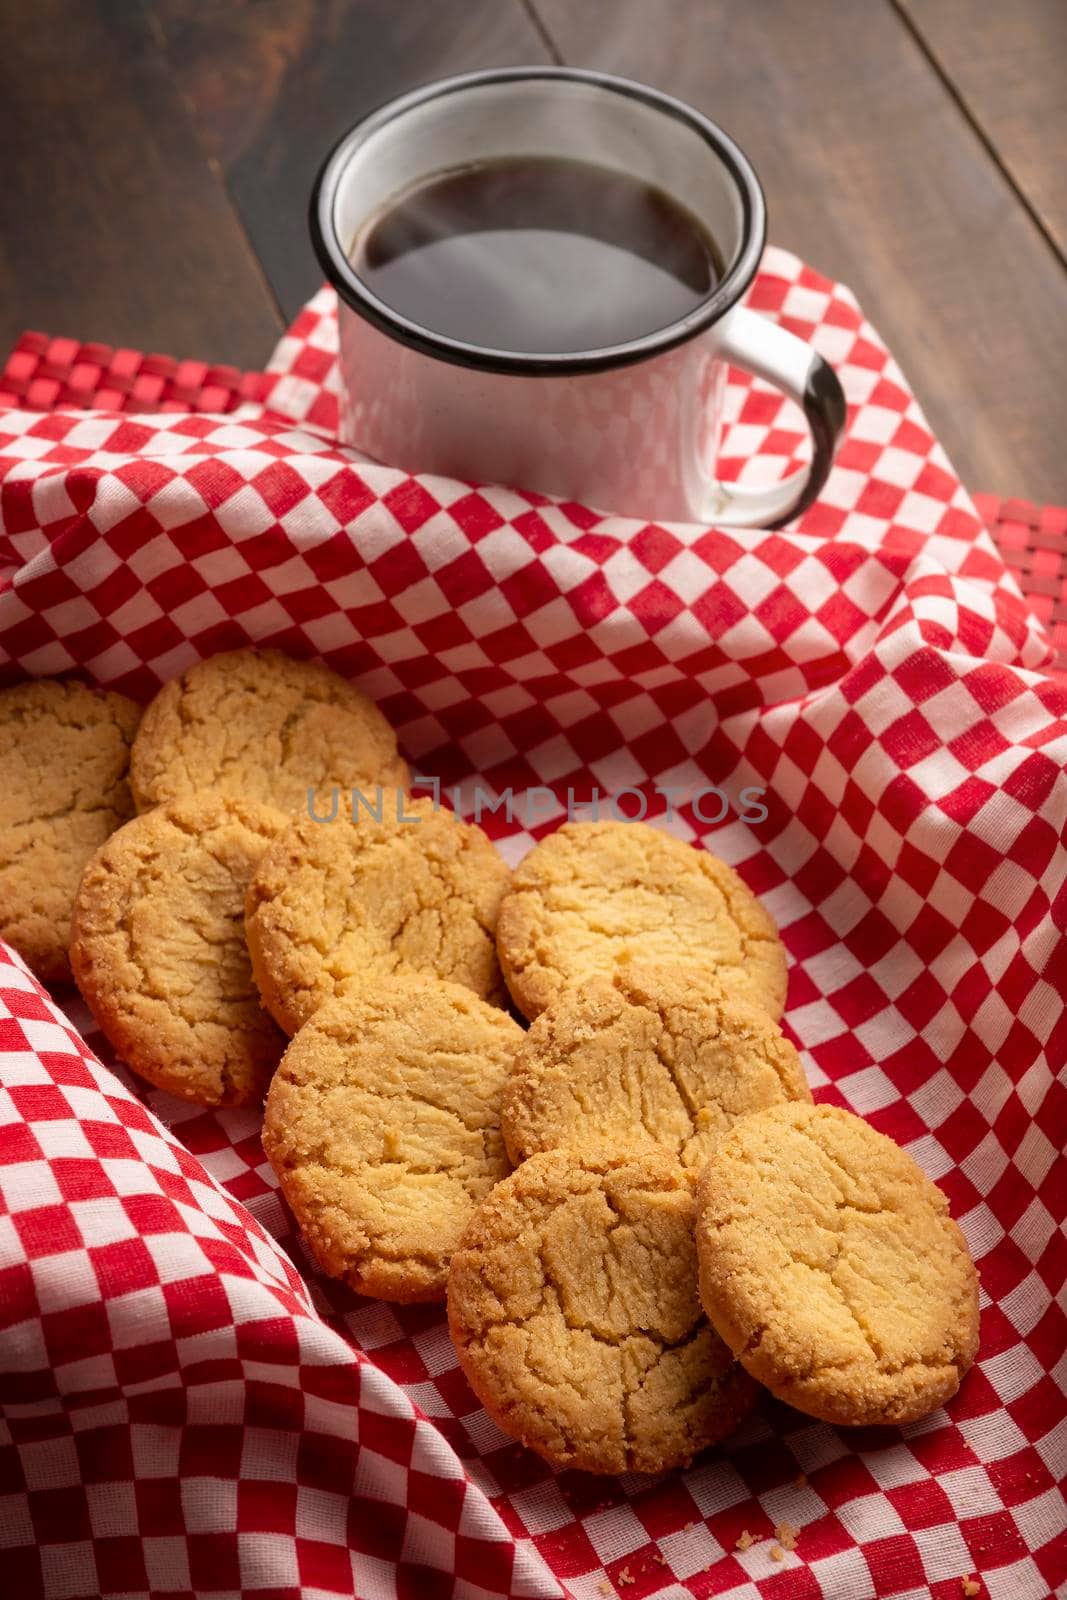 Homemade crunchy cookies and a coffee cup on wooden rustic table